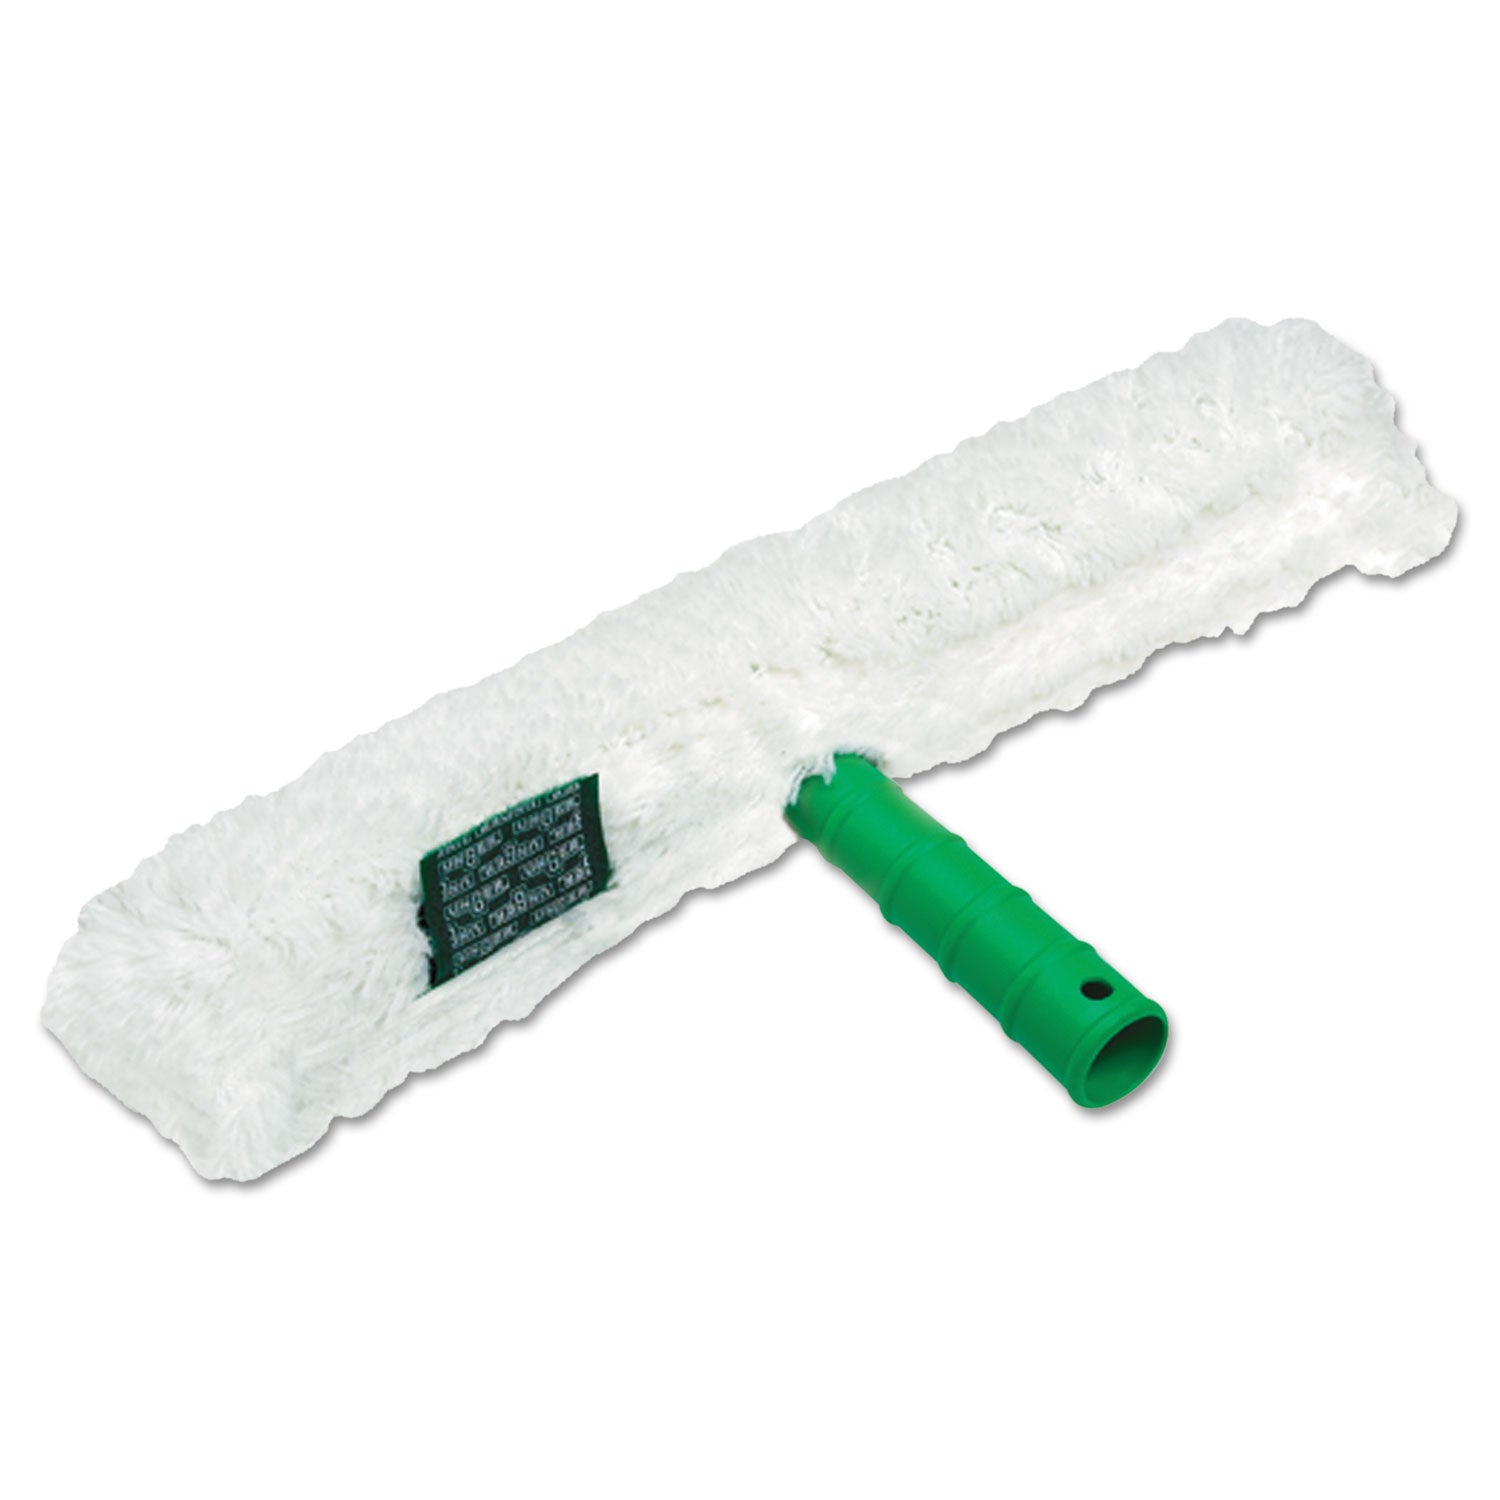 original-strip-washer-with-green-nylon-handle10-wide-blade-55-handle_ungwc250 - 1